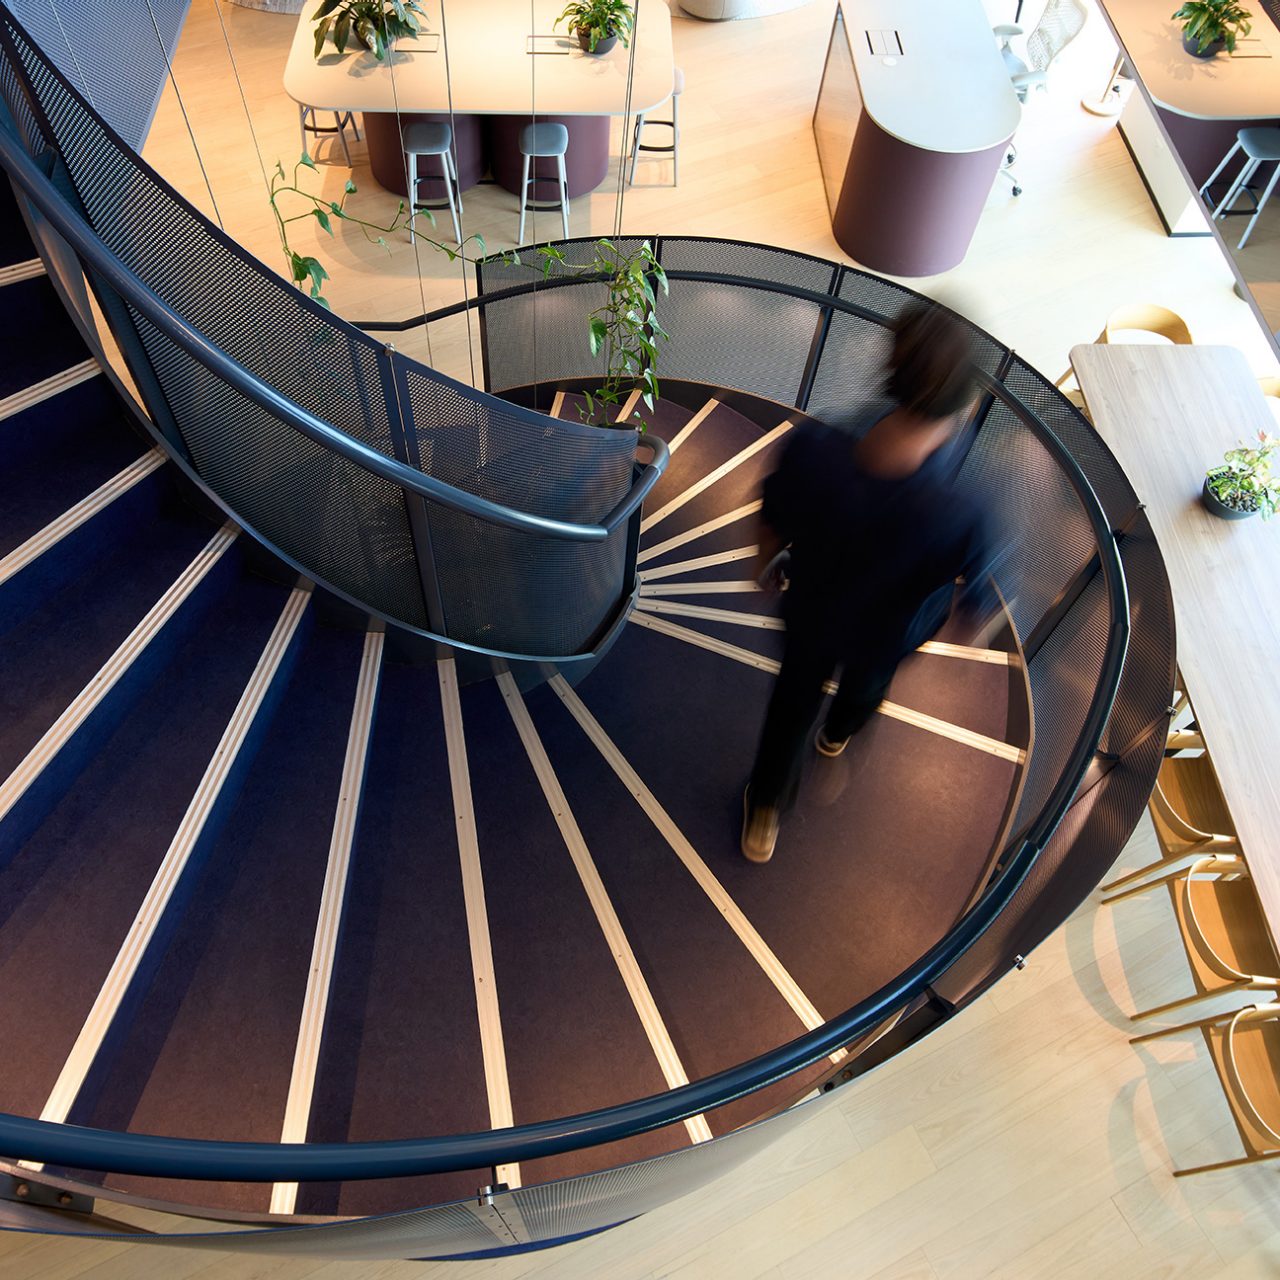 Man walking down spiral staircase in corporate office